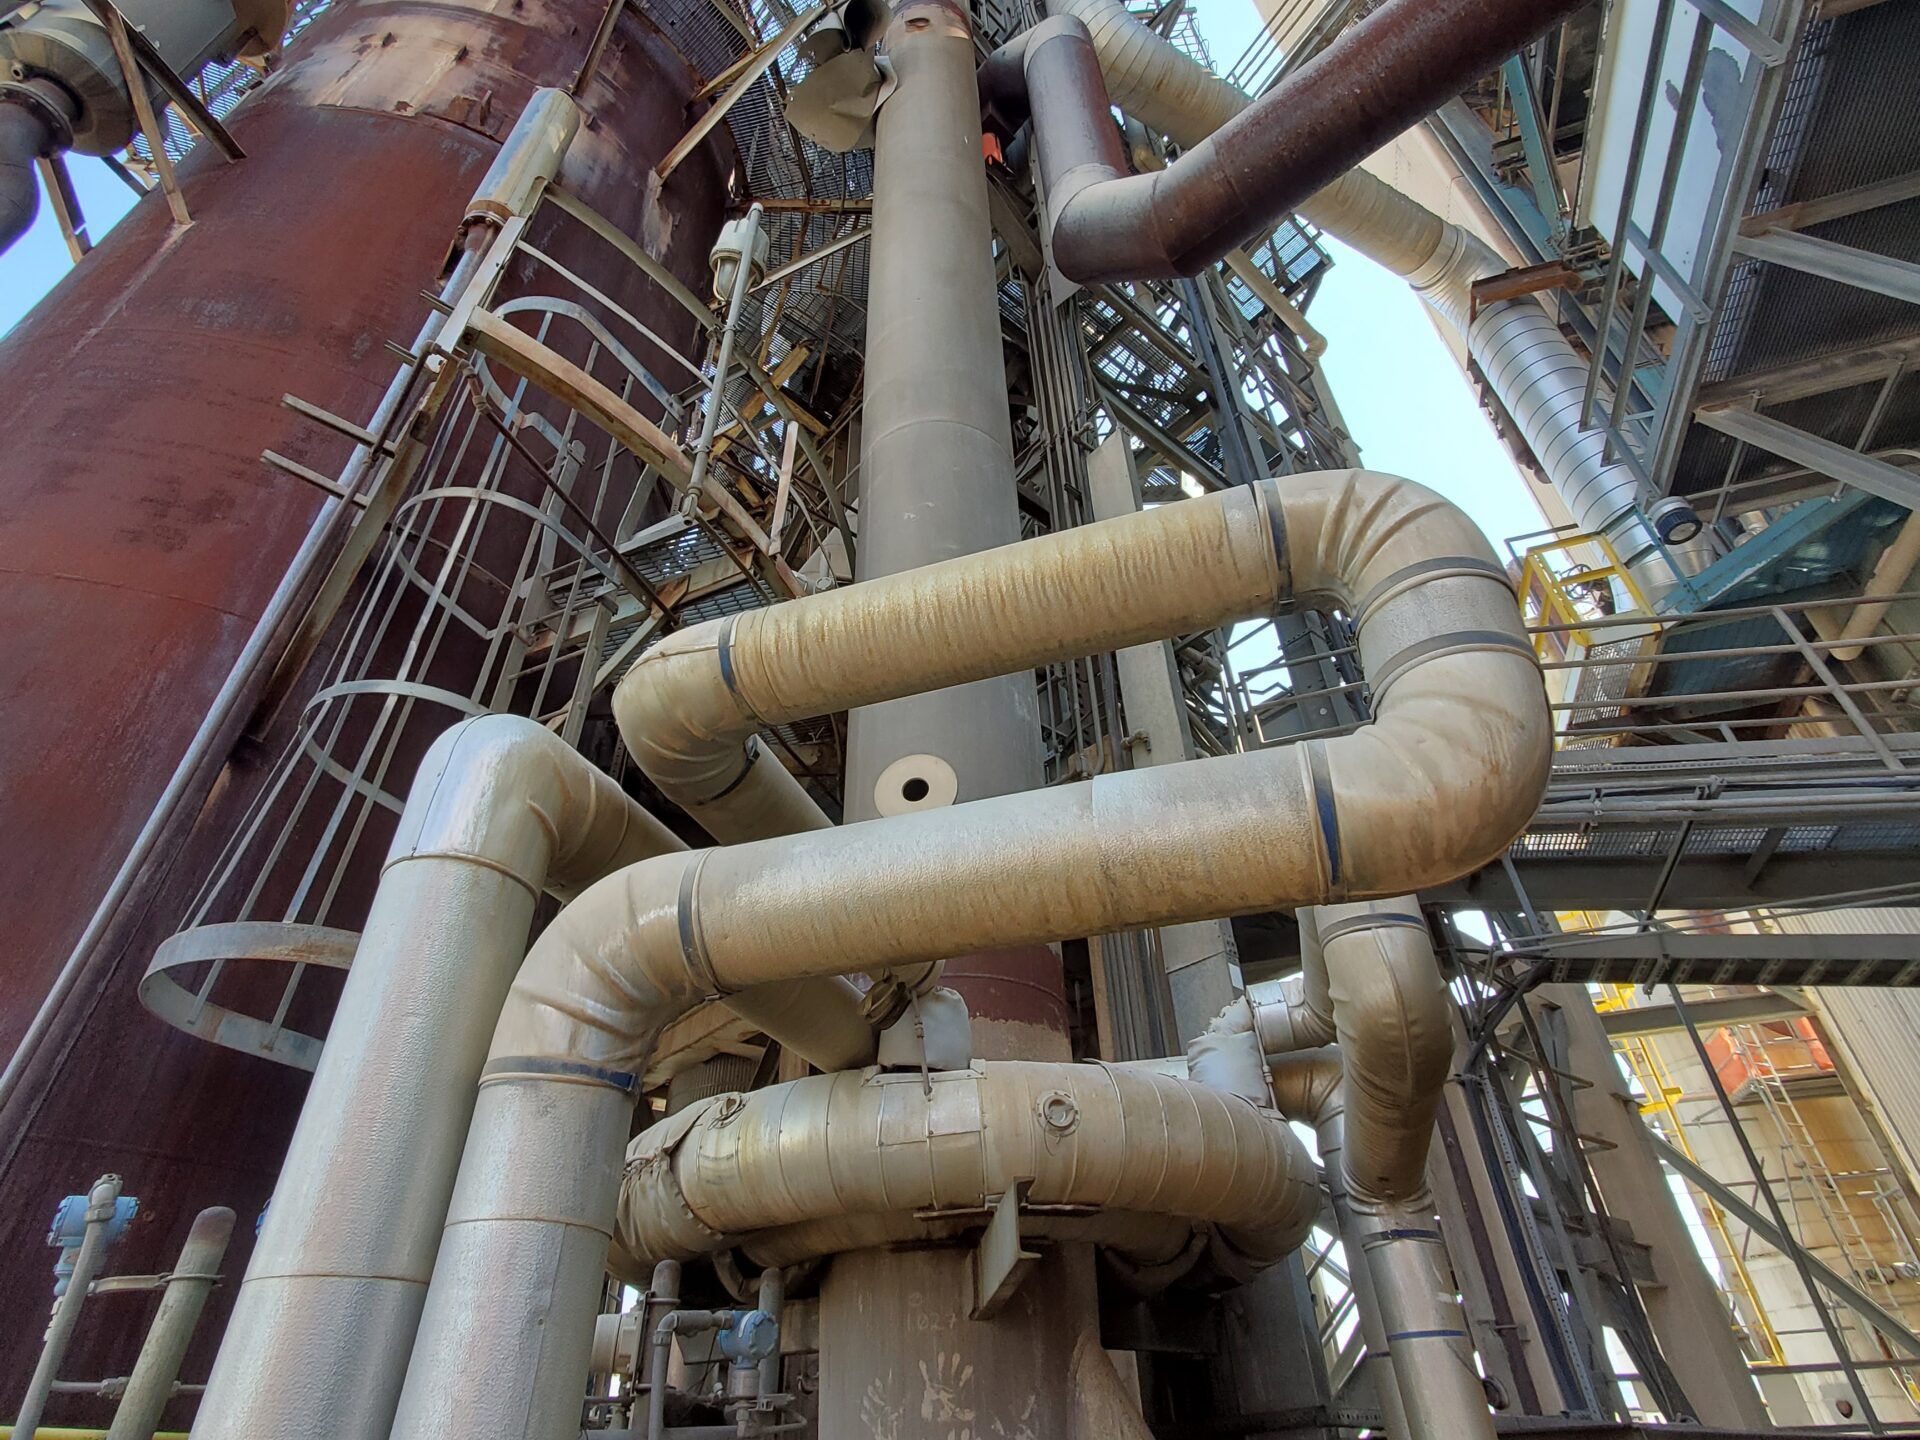 A local refinery planned to replace the catalyst regeneration riser on their FCC unit during turnaround; however, the existing injector piping had become bent and distorted after many years of thermal cycling, which was exacerbated further by bottomed-out spring can supports.